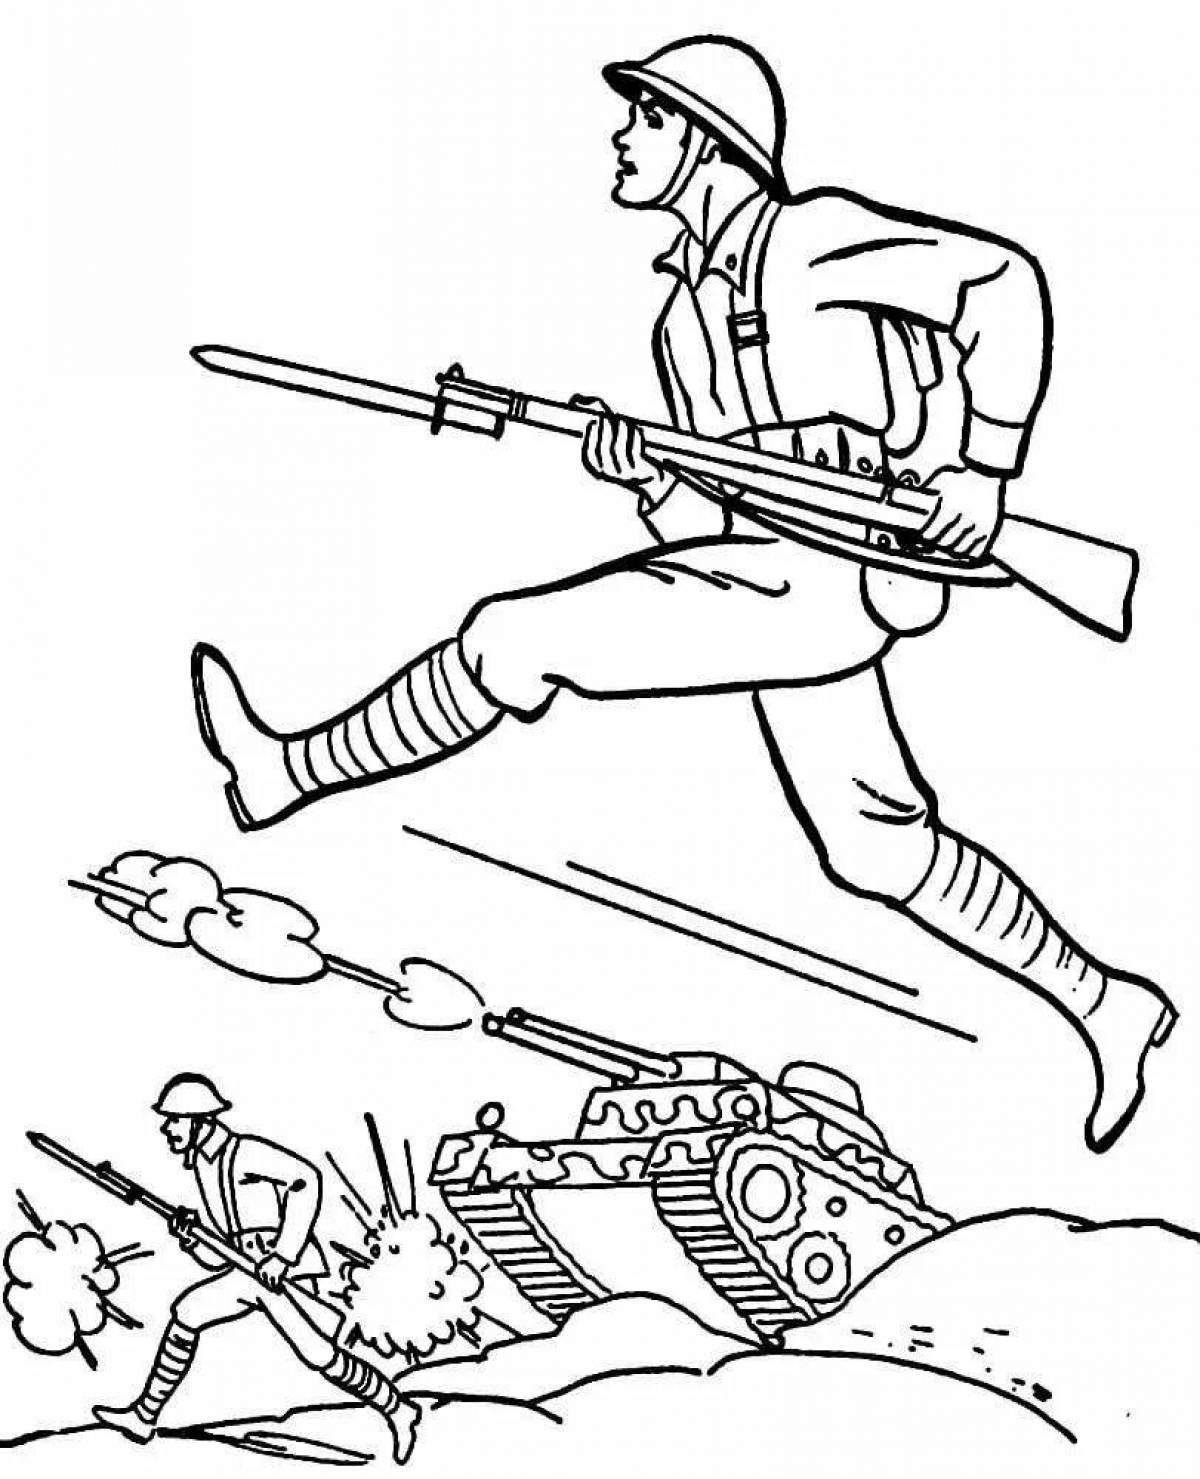 Glorious military coloring for children